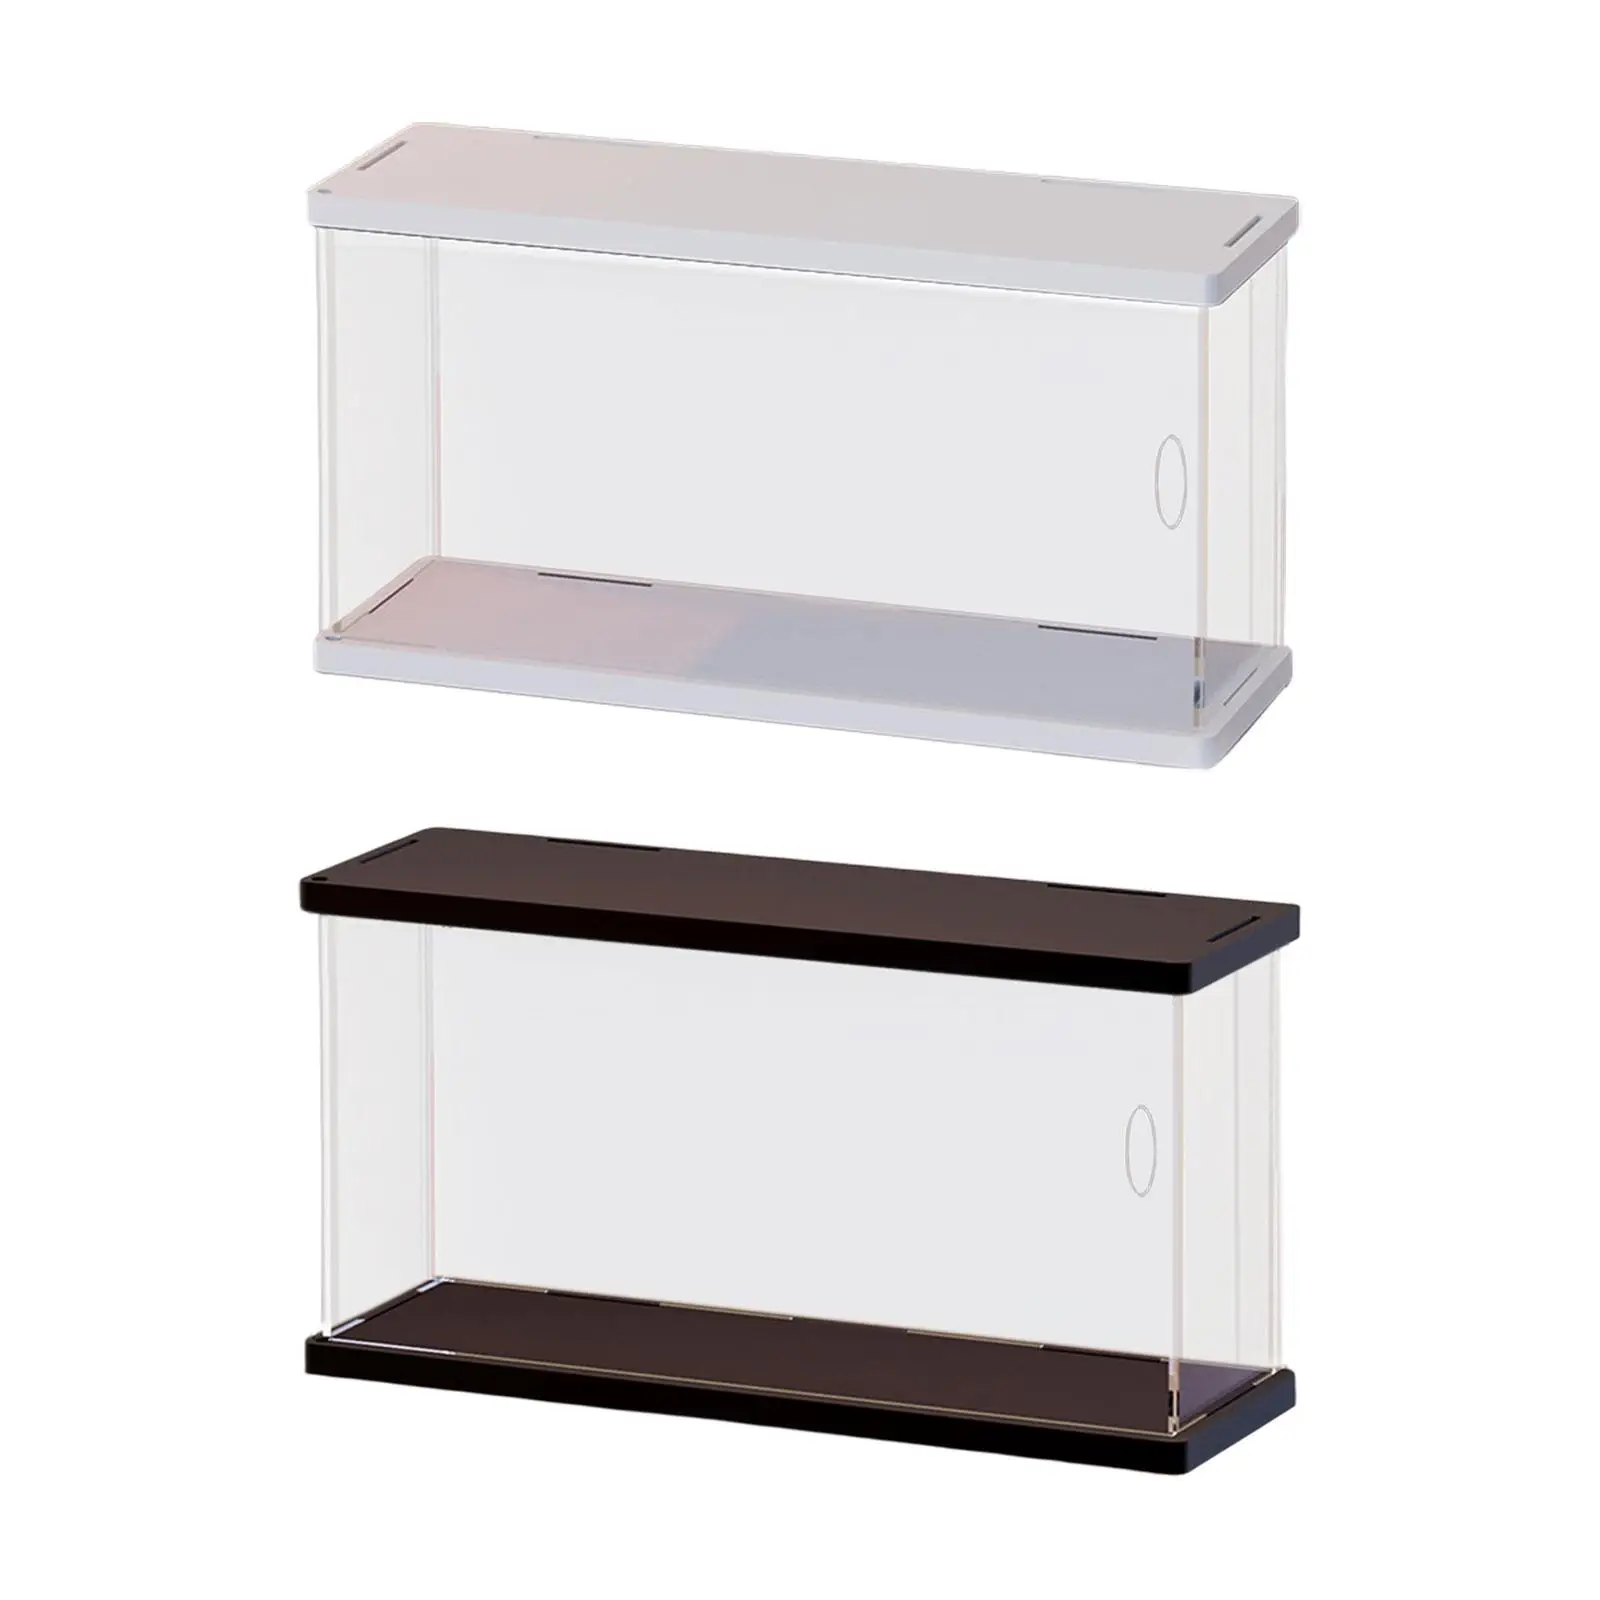 Acrylic Display Case for Displaying Collectibles Dustproof Clear Acrylic Display Case for Action Figures Collectibles